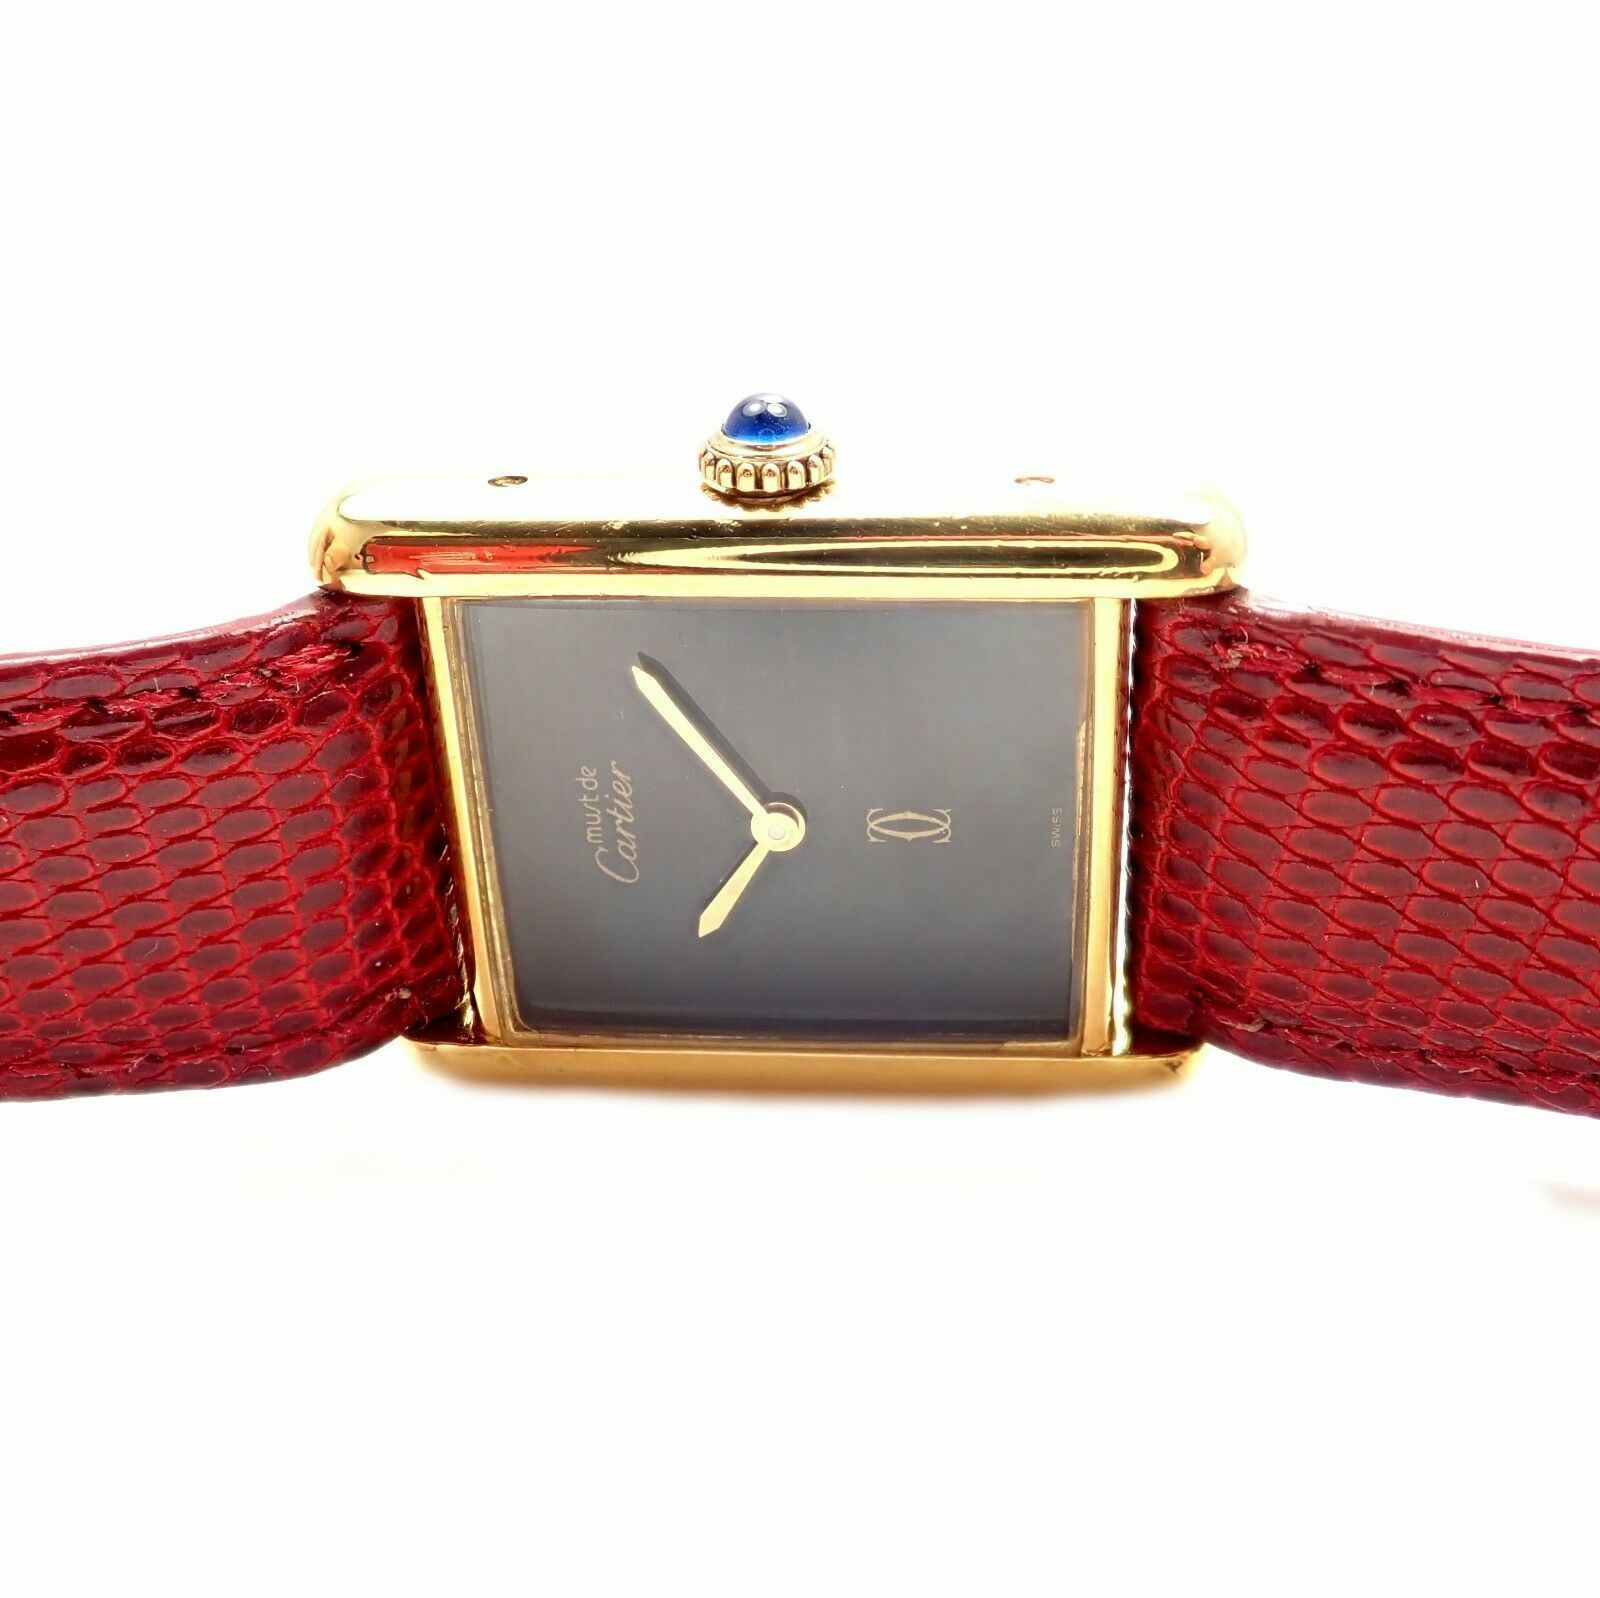 Cartier Jewelry & Watches:Watches, Parts & Accessories:Watches:Wristwatches Authentic! Cartier Tank Vermeil 925 Unisex Manual Wind Watch